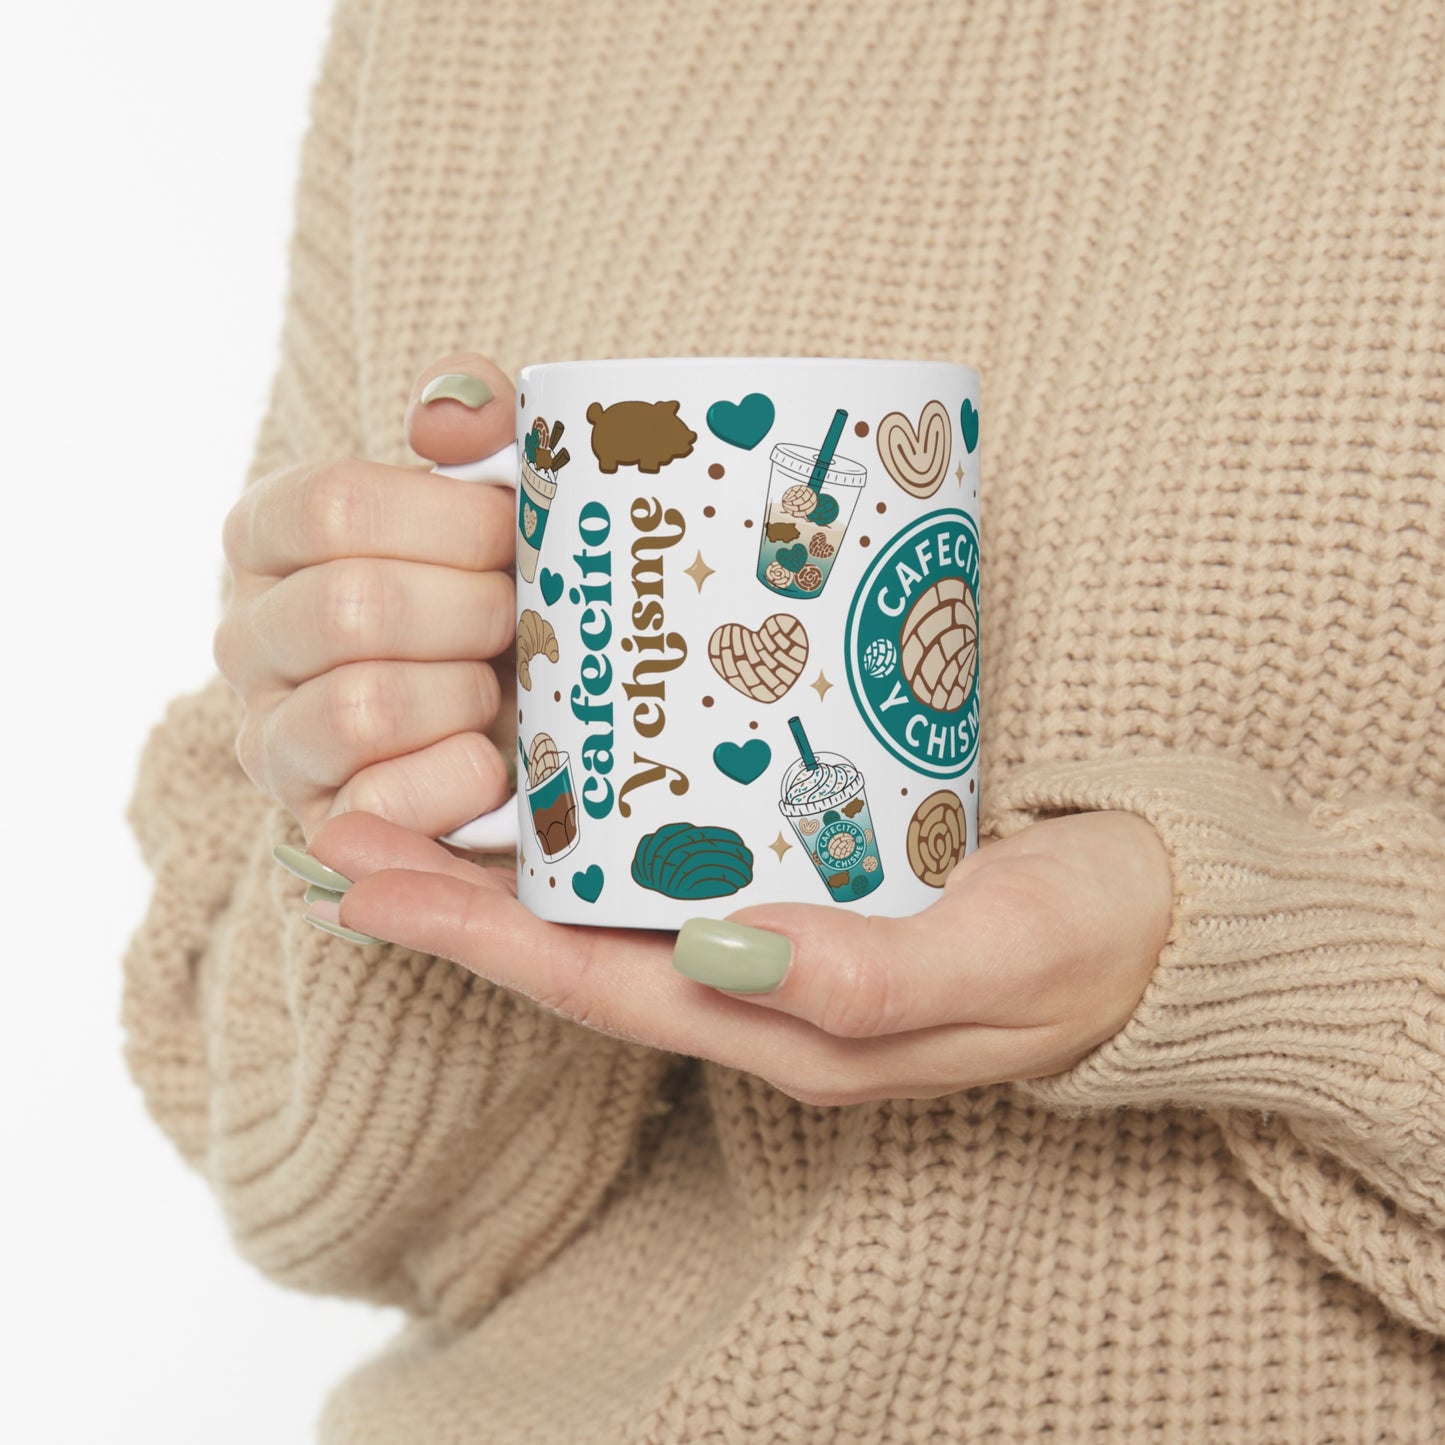 cafecito y chisme Ceramic Mug 11oz for comadre, ahijada or Mexican best friend. Navidad gift for her.